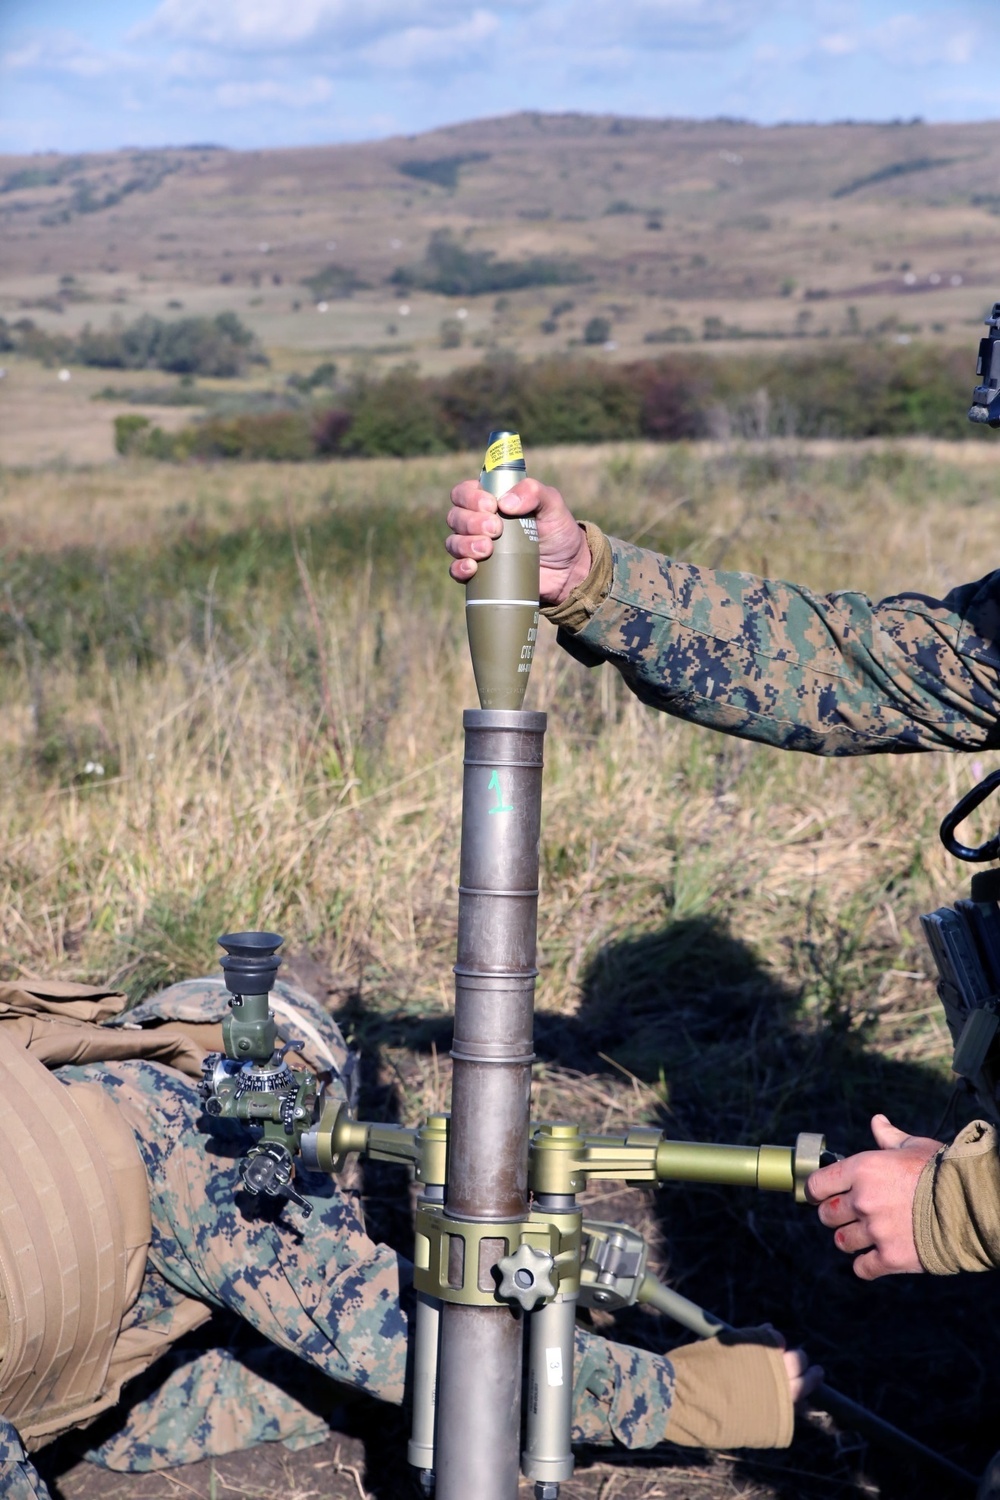 Marines, Romanian forces train to thwart potential attack at CINCU-14